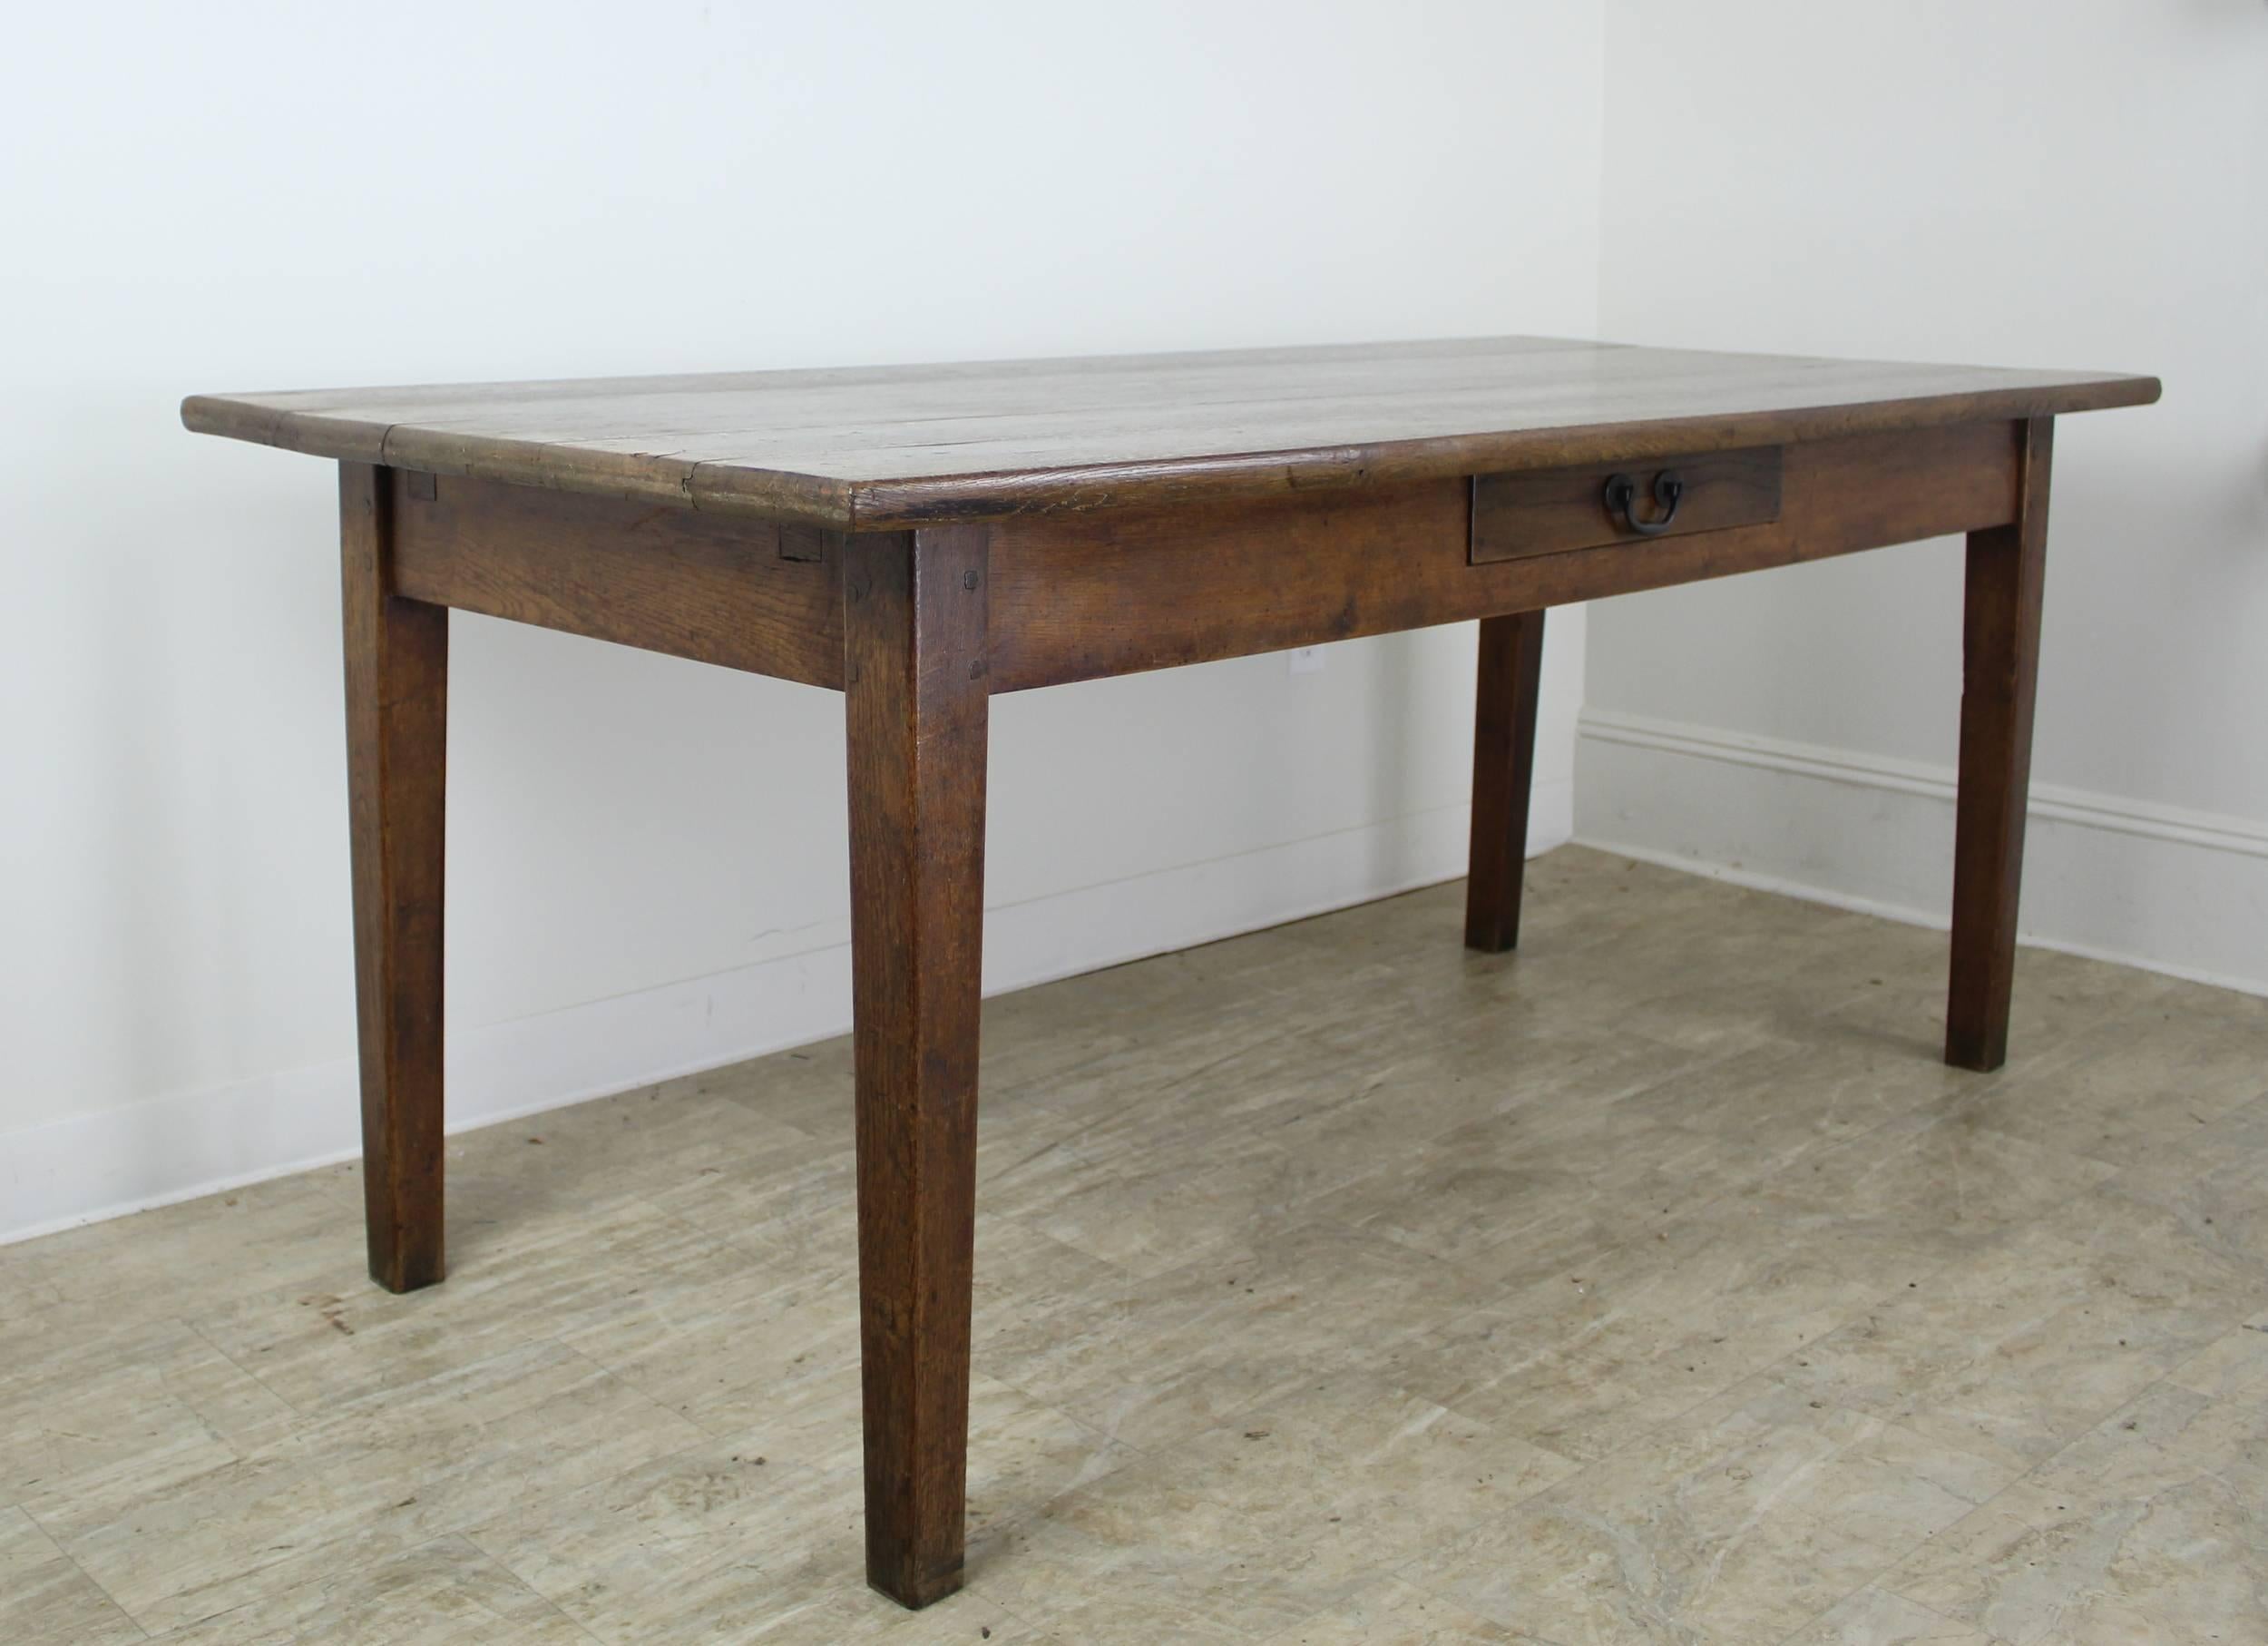 A sturdy and handsome French oak farm table with classic tapered legs, a thick top and single drawer for visual interest. The color and grain on this table are lovely, as is the patina and shine. The 24 inch apron height is good for knees. 60 inches